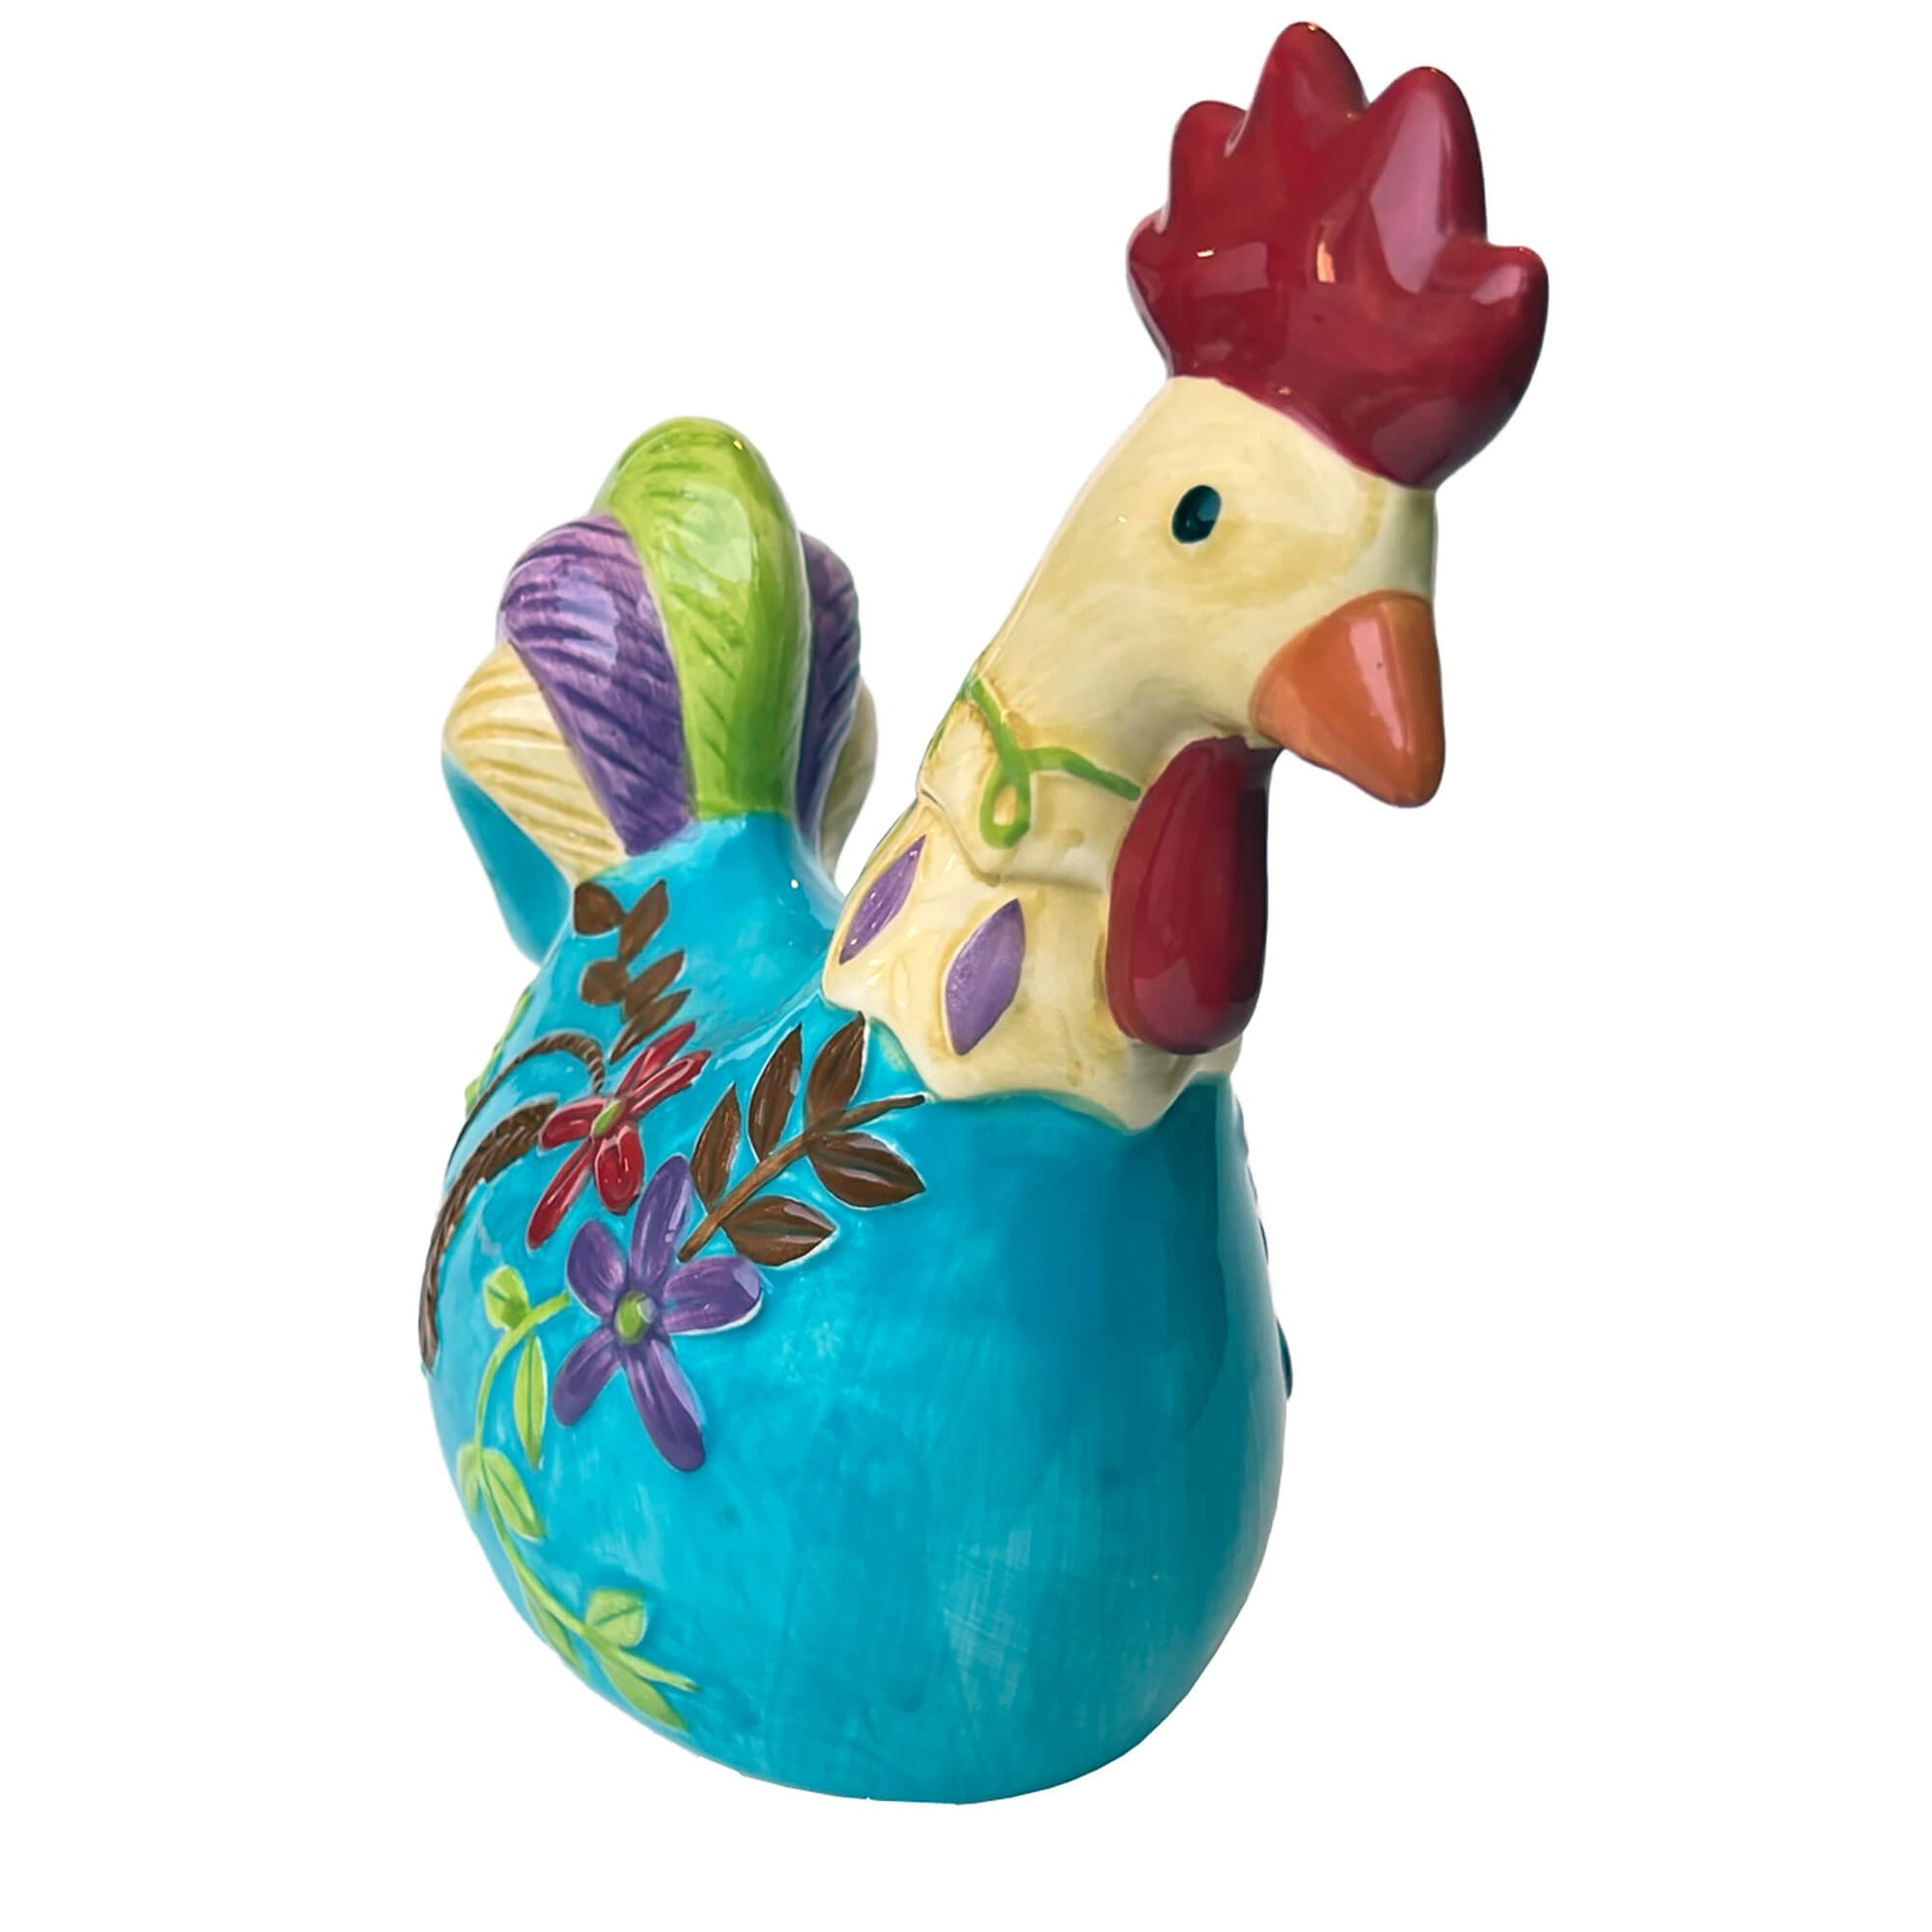 Apropos-Home-Collection-Blue-Ceramic-Chicken-Turkey-angled-view